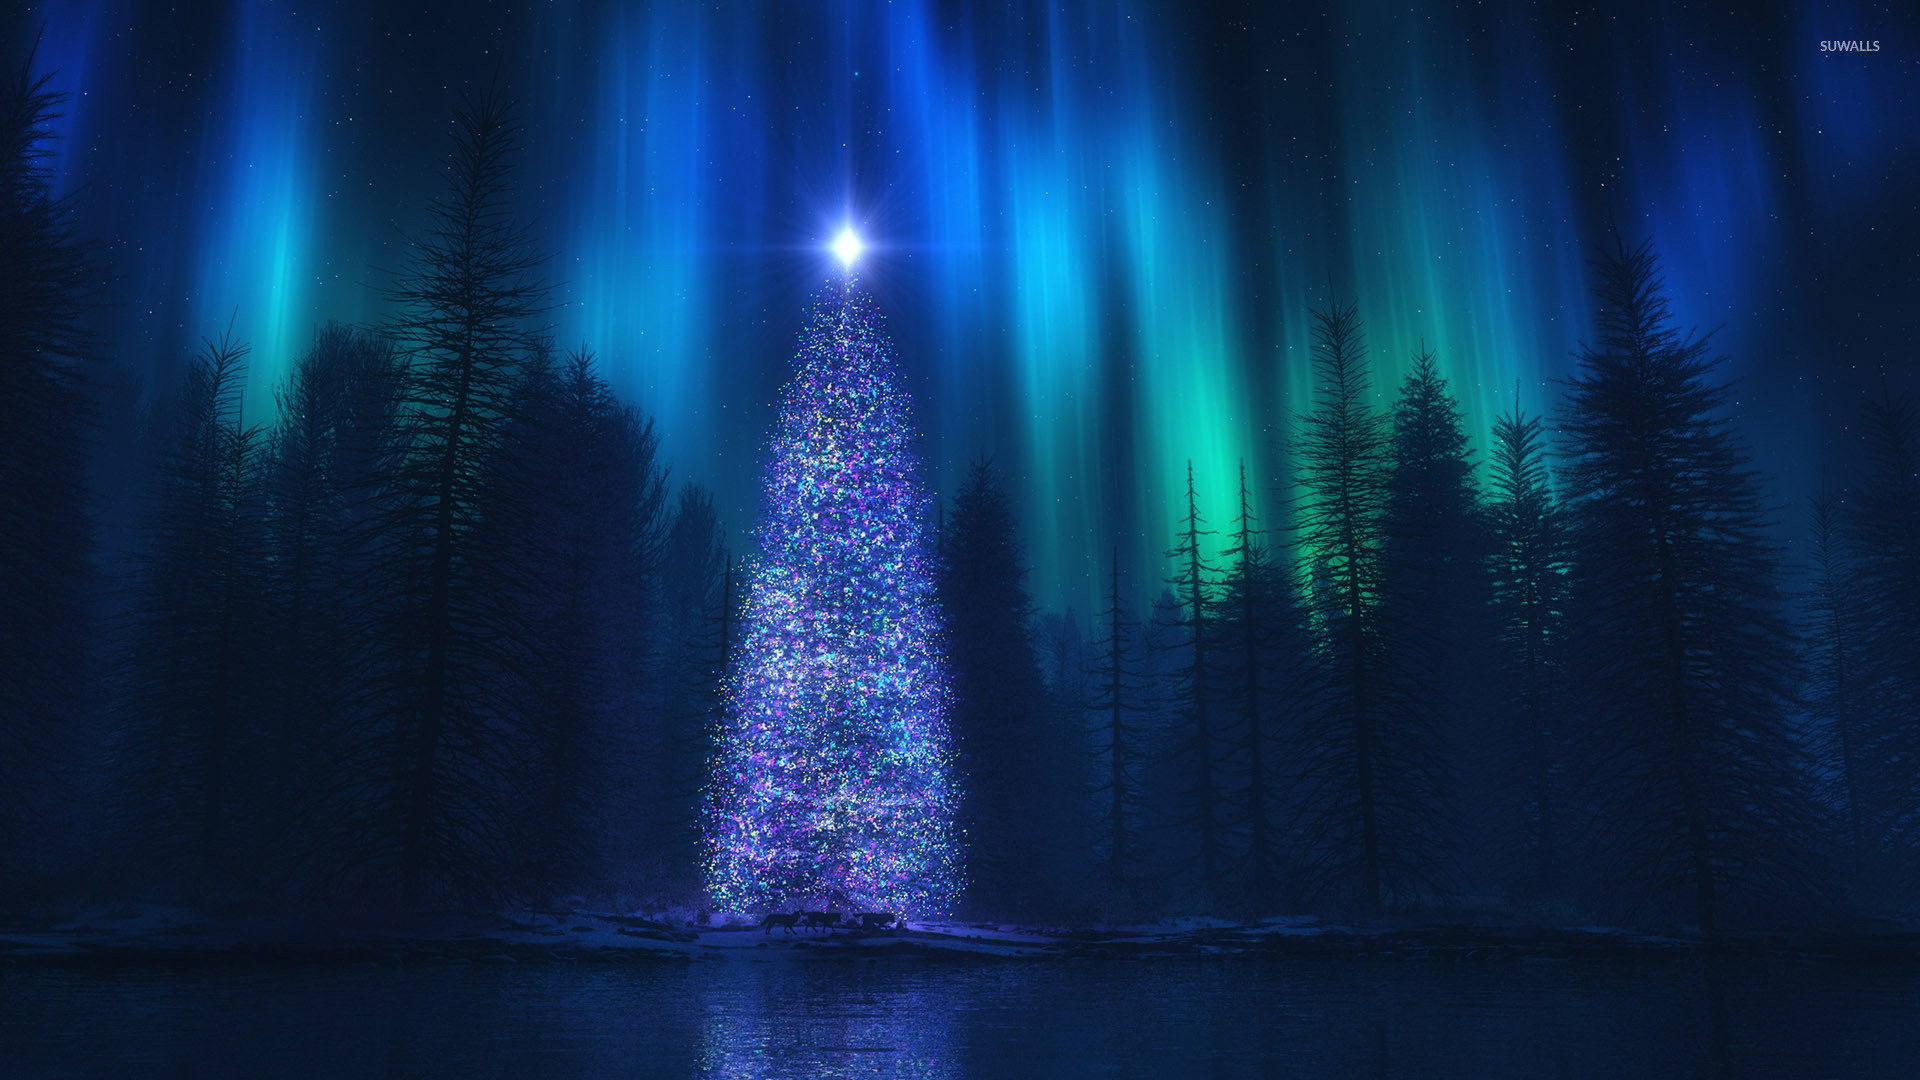 1920x1080 Christmas tree in the forest wallpaper  jpg